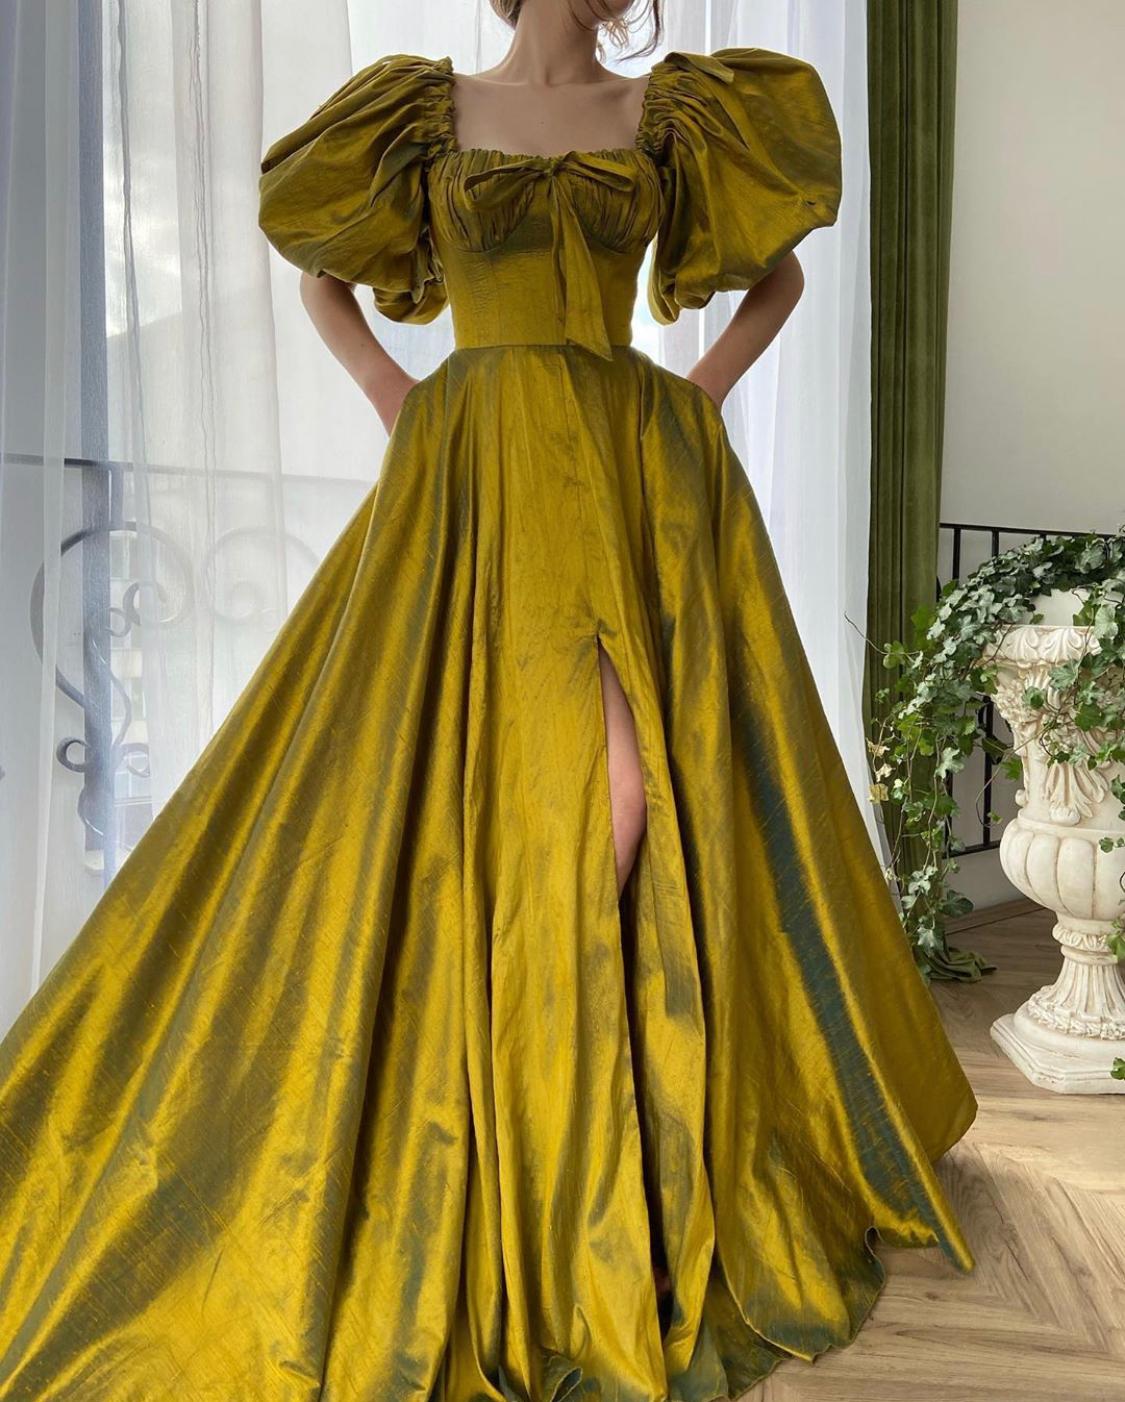 Yellow A-Line dress with off the shoulder sleeves